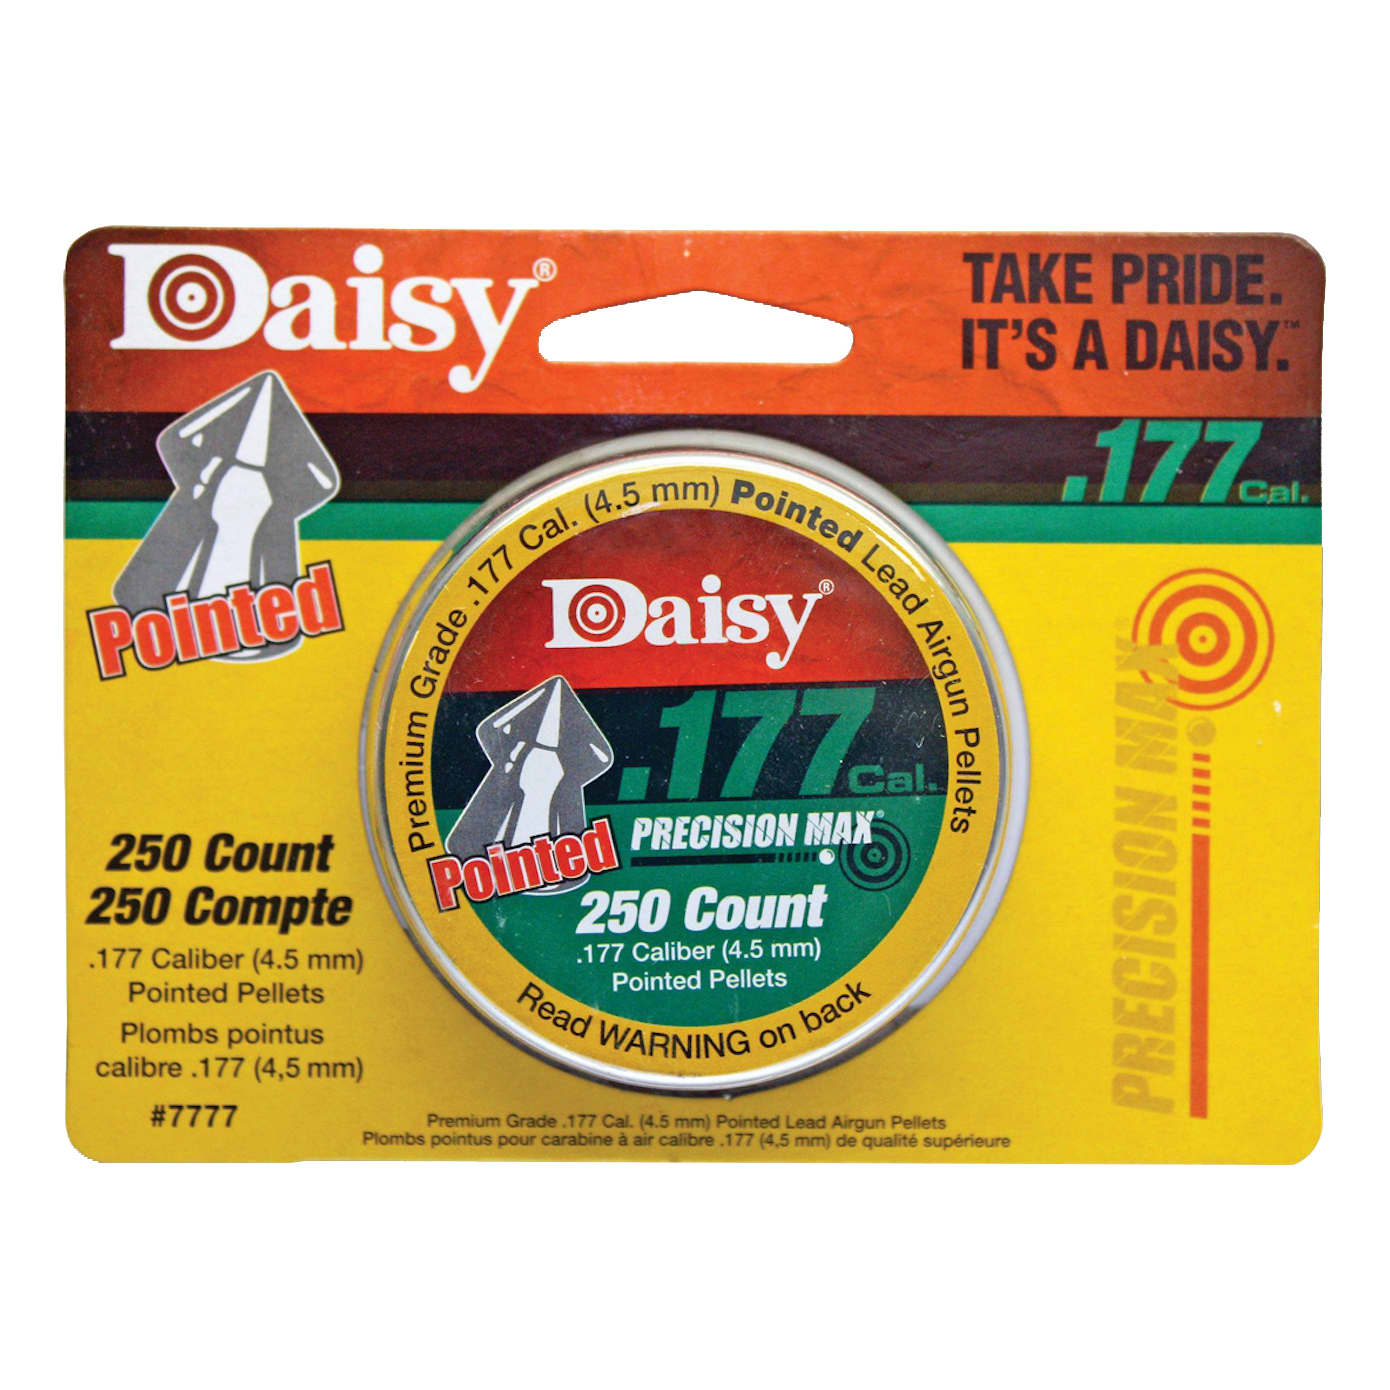 Daisy® Precision Max Pointed Pellets